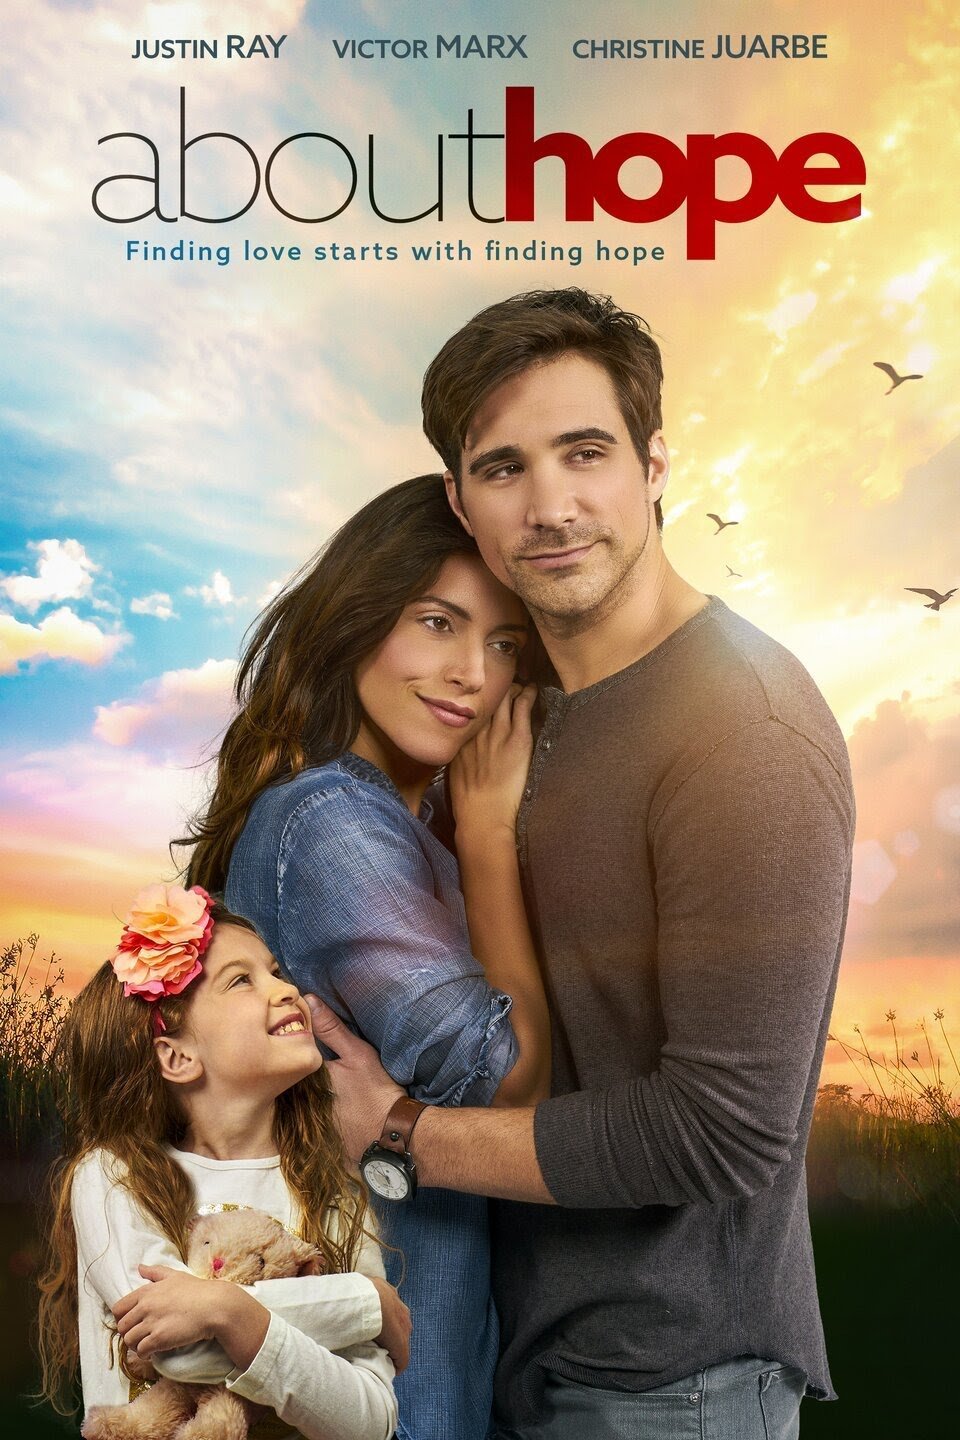 Poster of the movie False Hopes